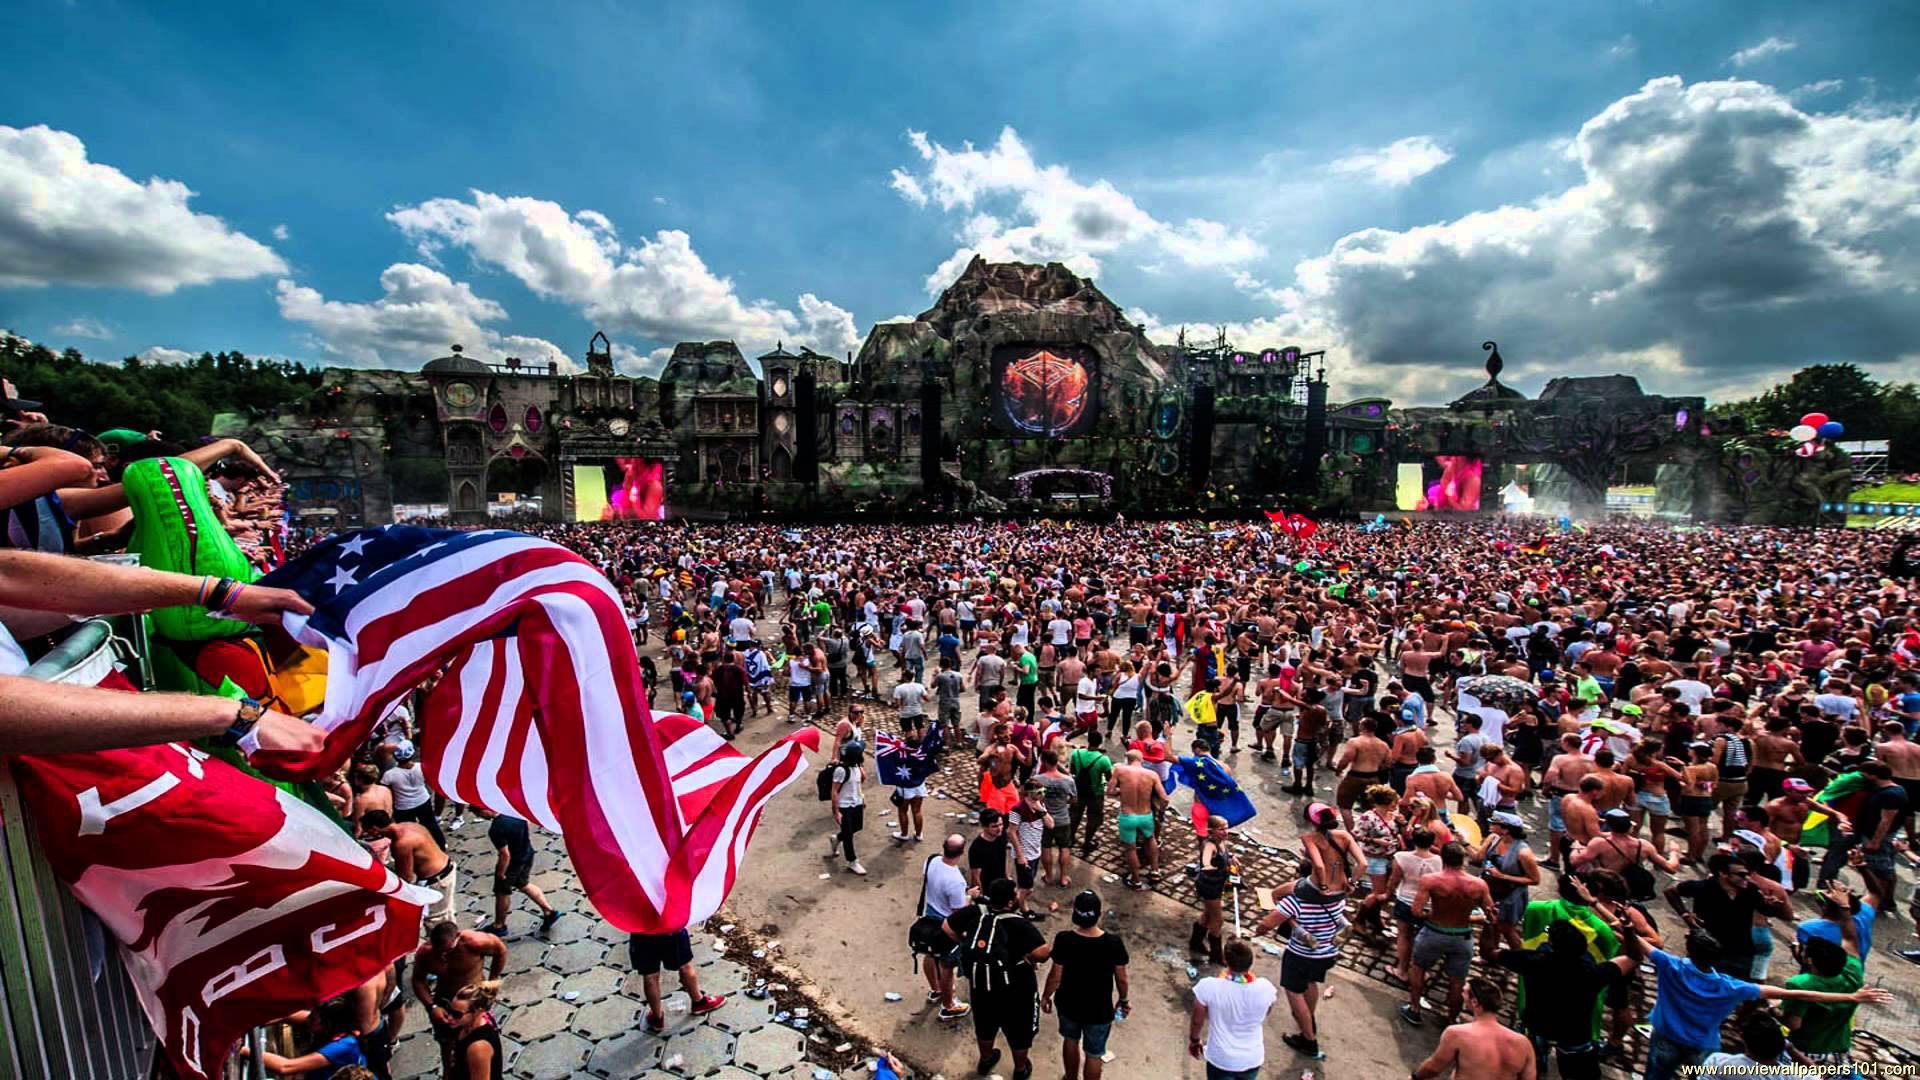 tomorrowland hd wallpapers,crowd,people,event,festival,public event